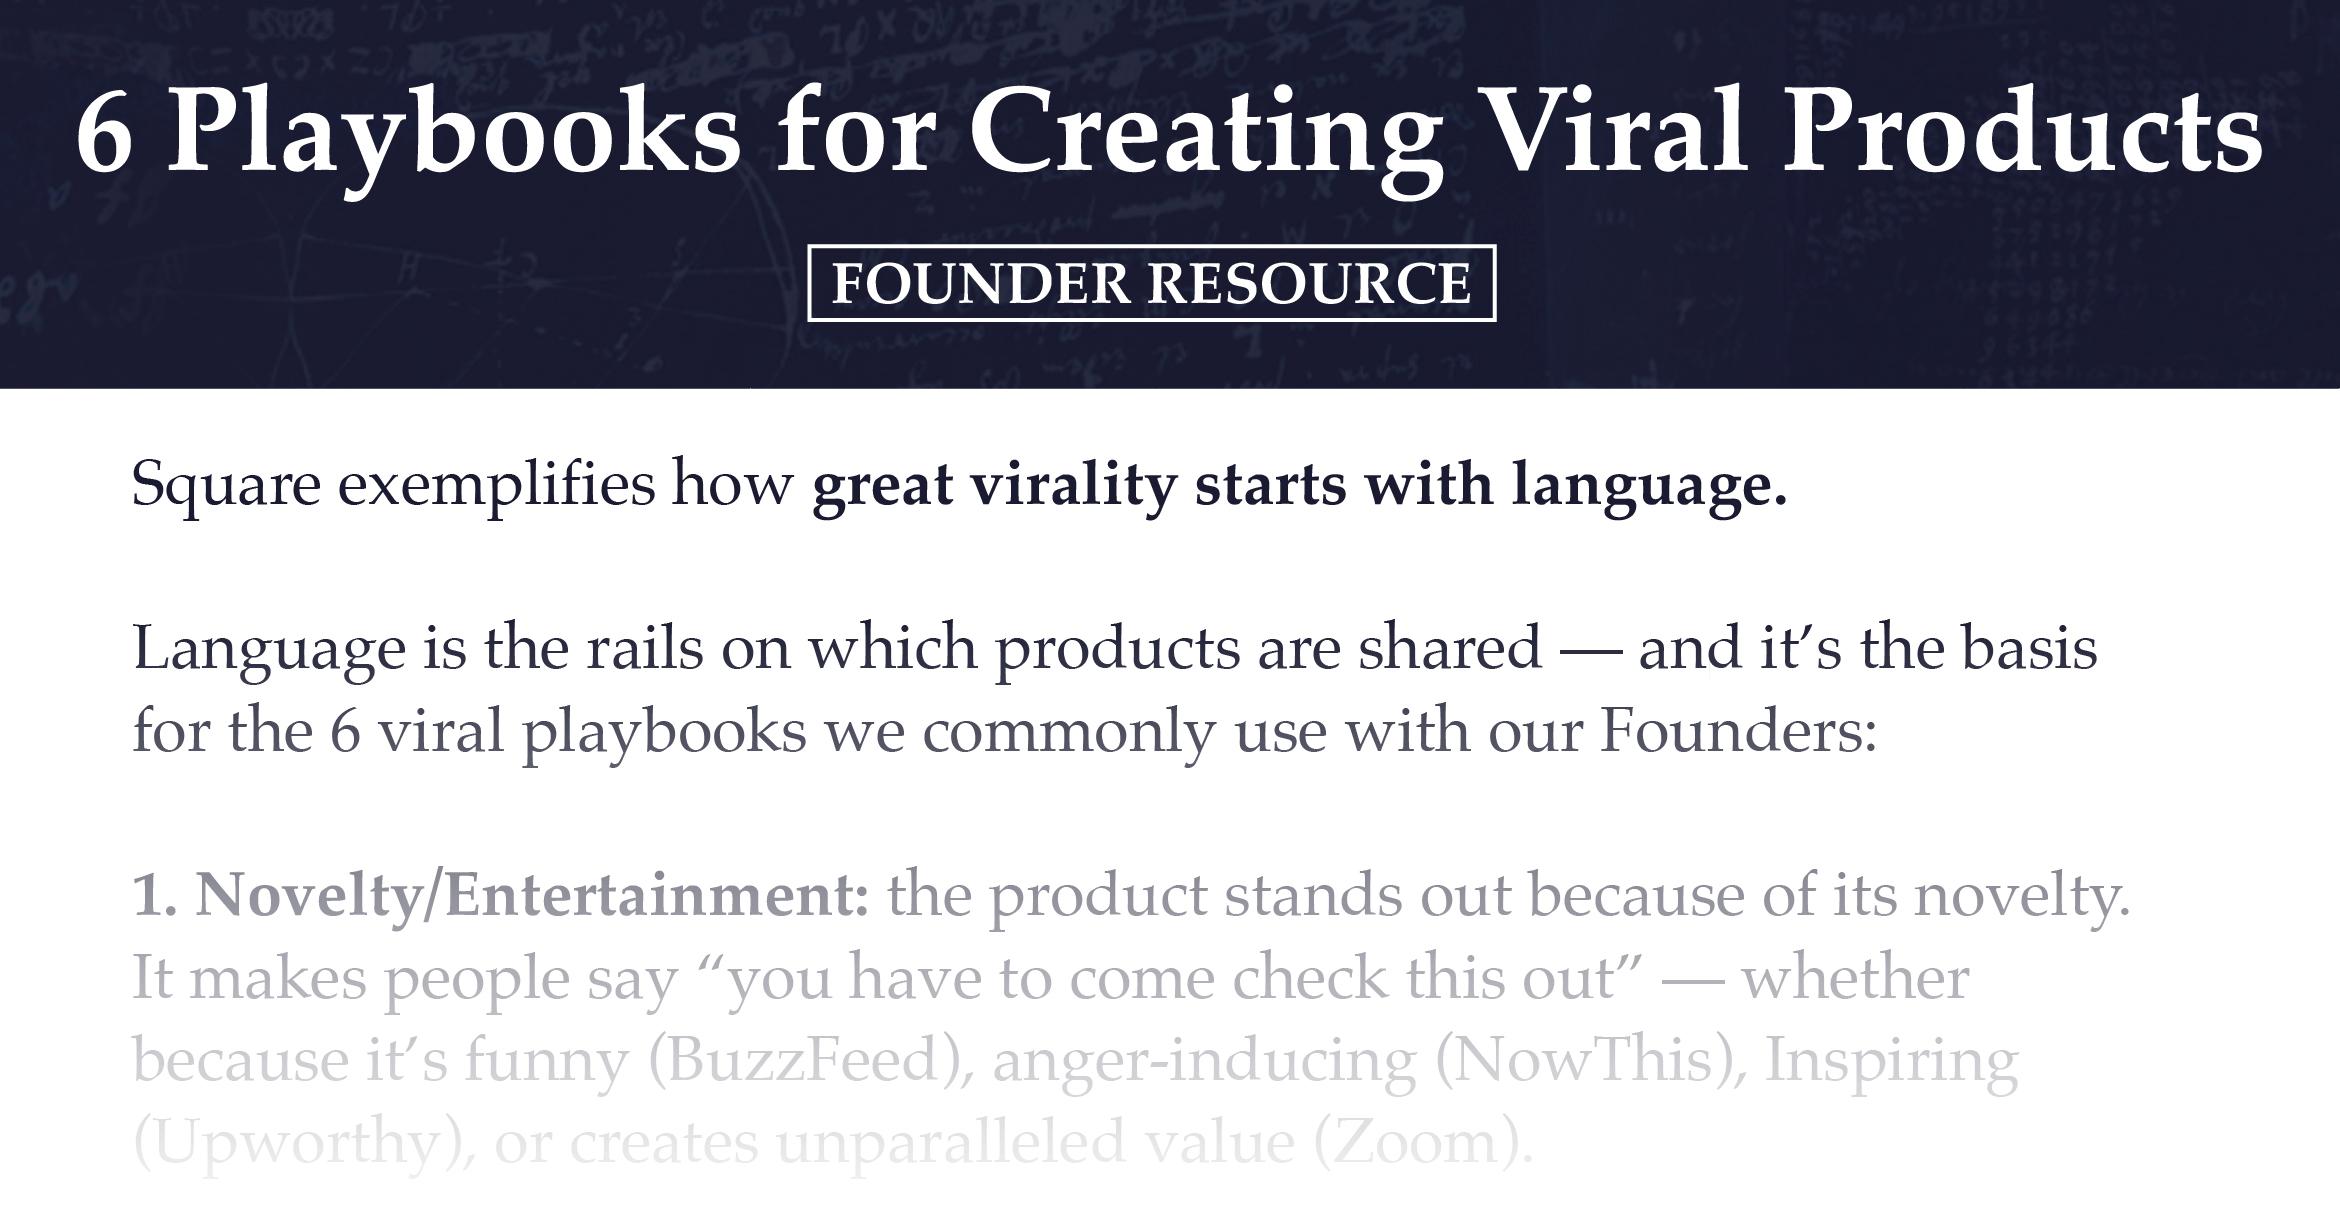 6 Playbooks for Creating Virality